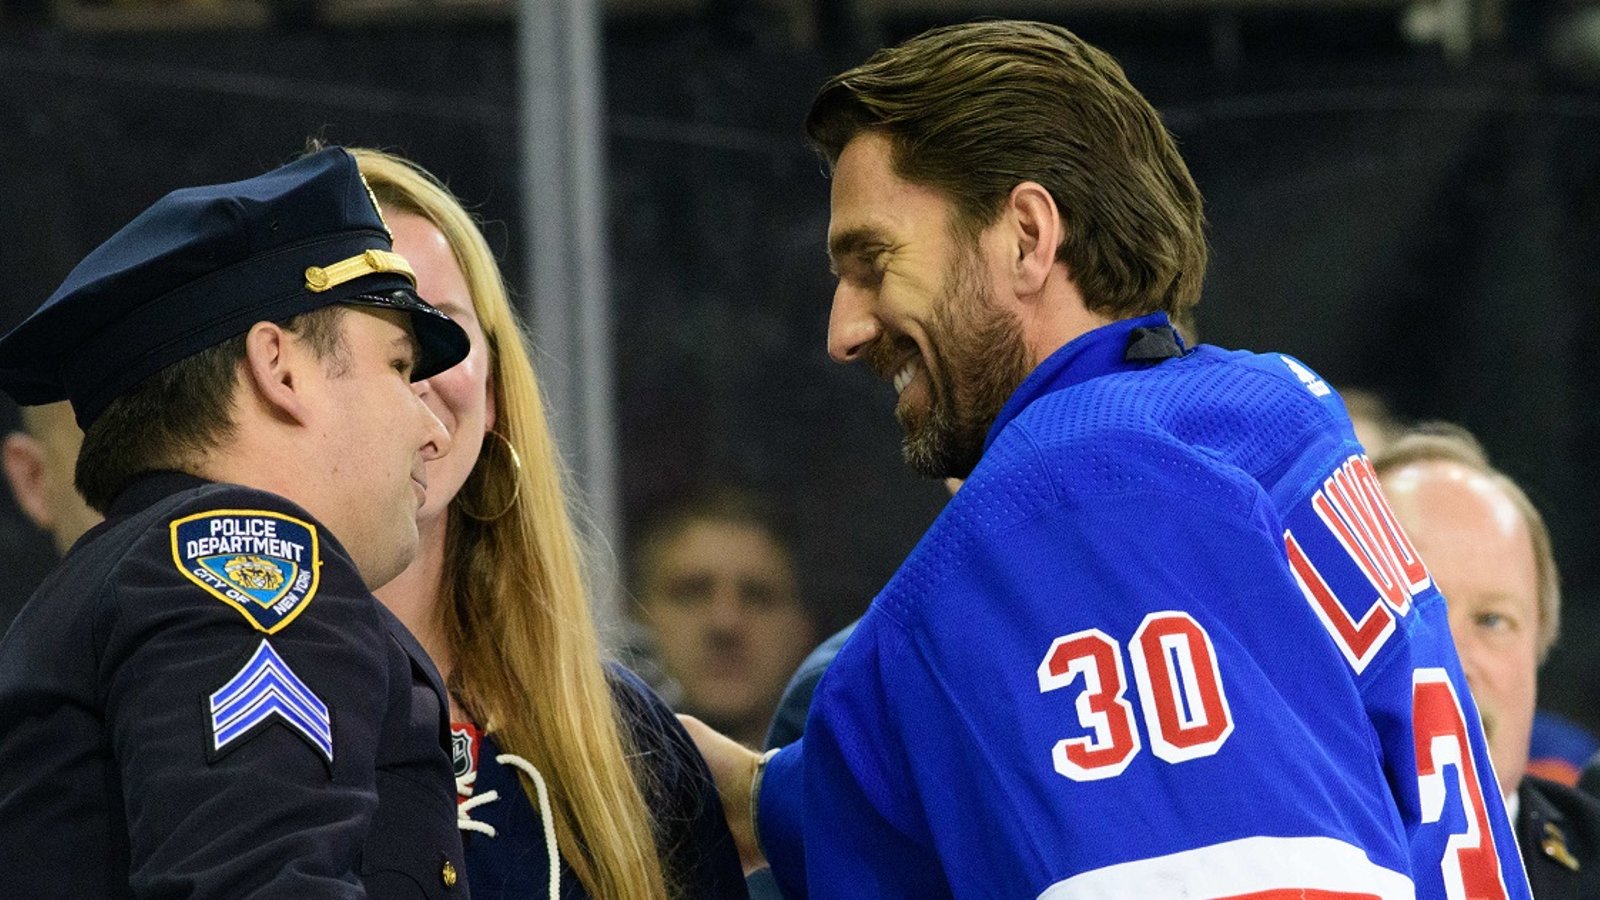 Henrik Lundqvist will receive the ultimate honor from the Rangers.